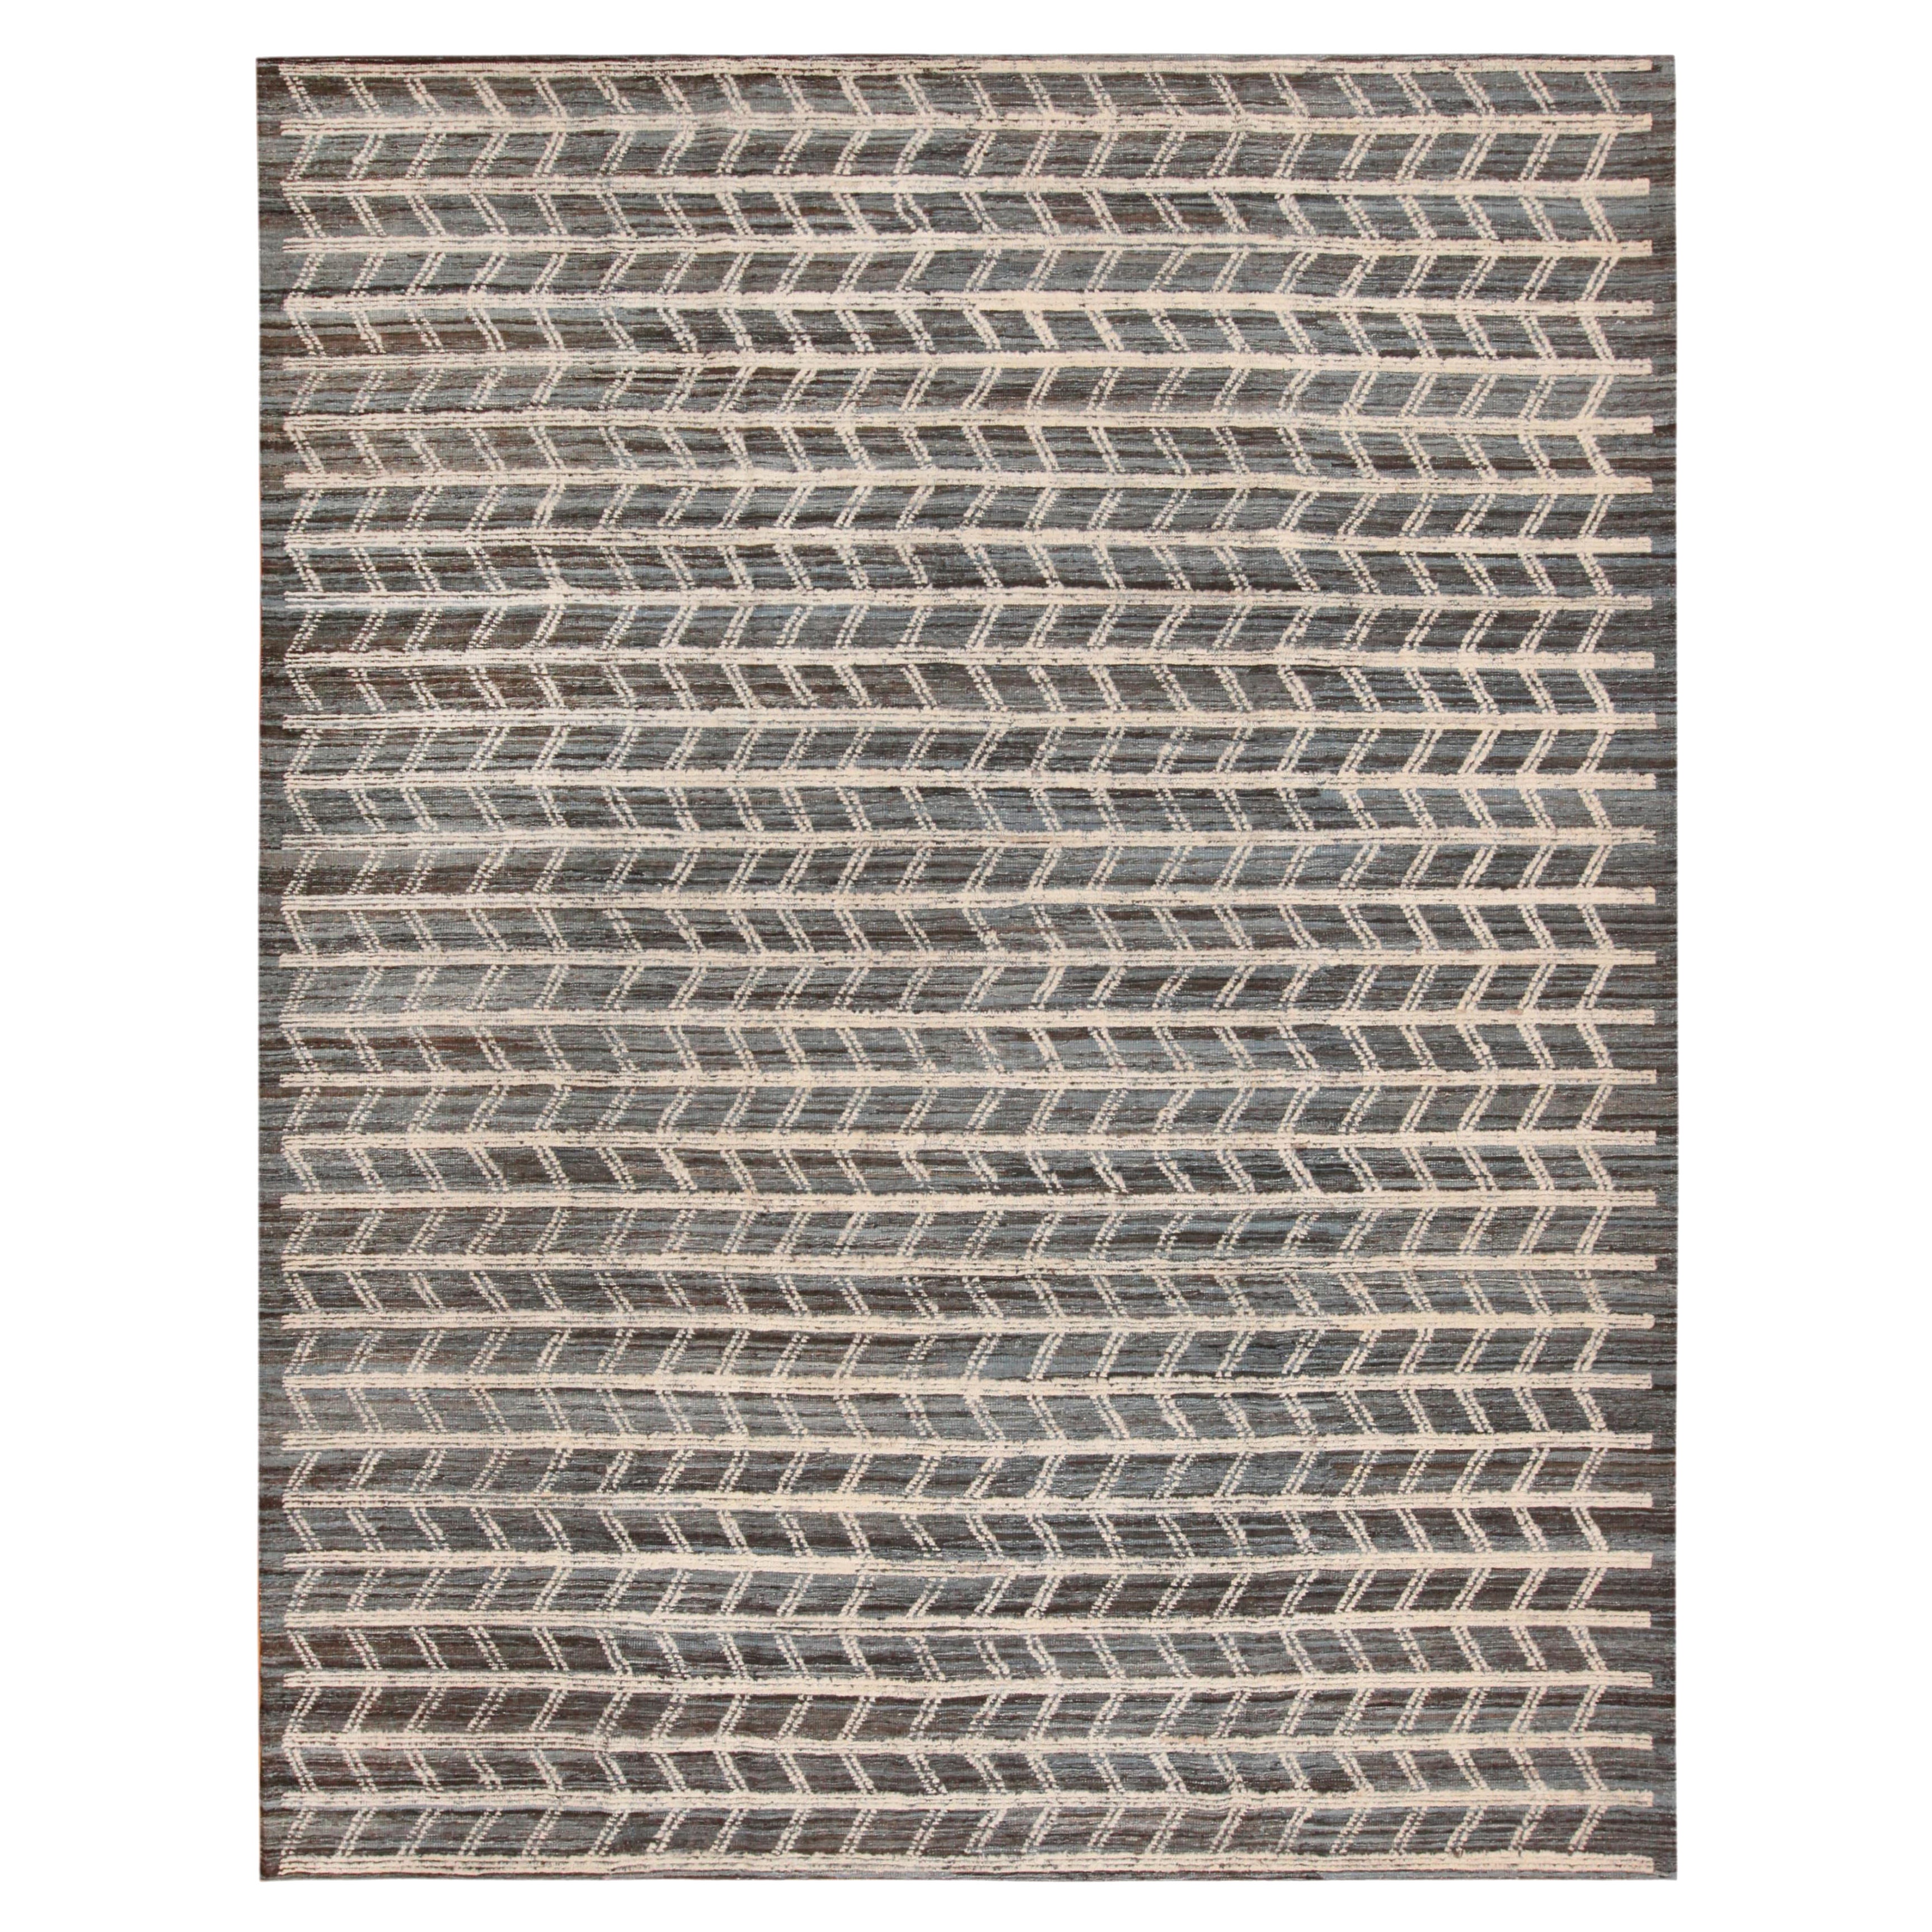 Nazmiyal Collection Geometric Zigzag Motif Modern Area Rug 10' x 12'7" For Sale